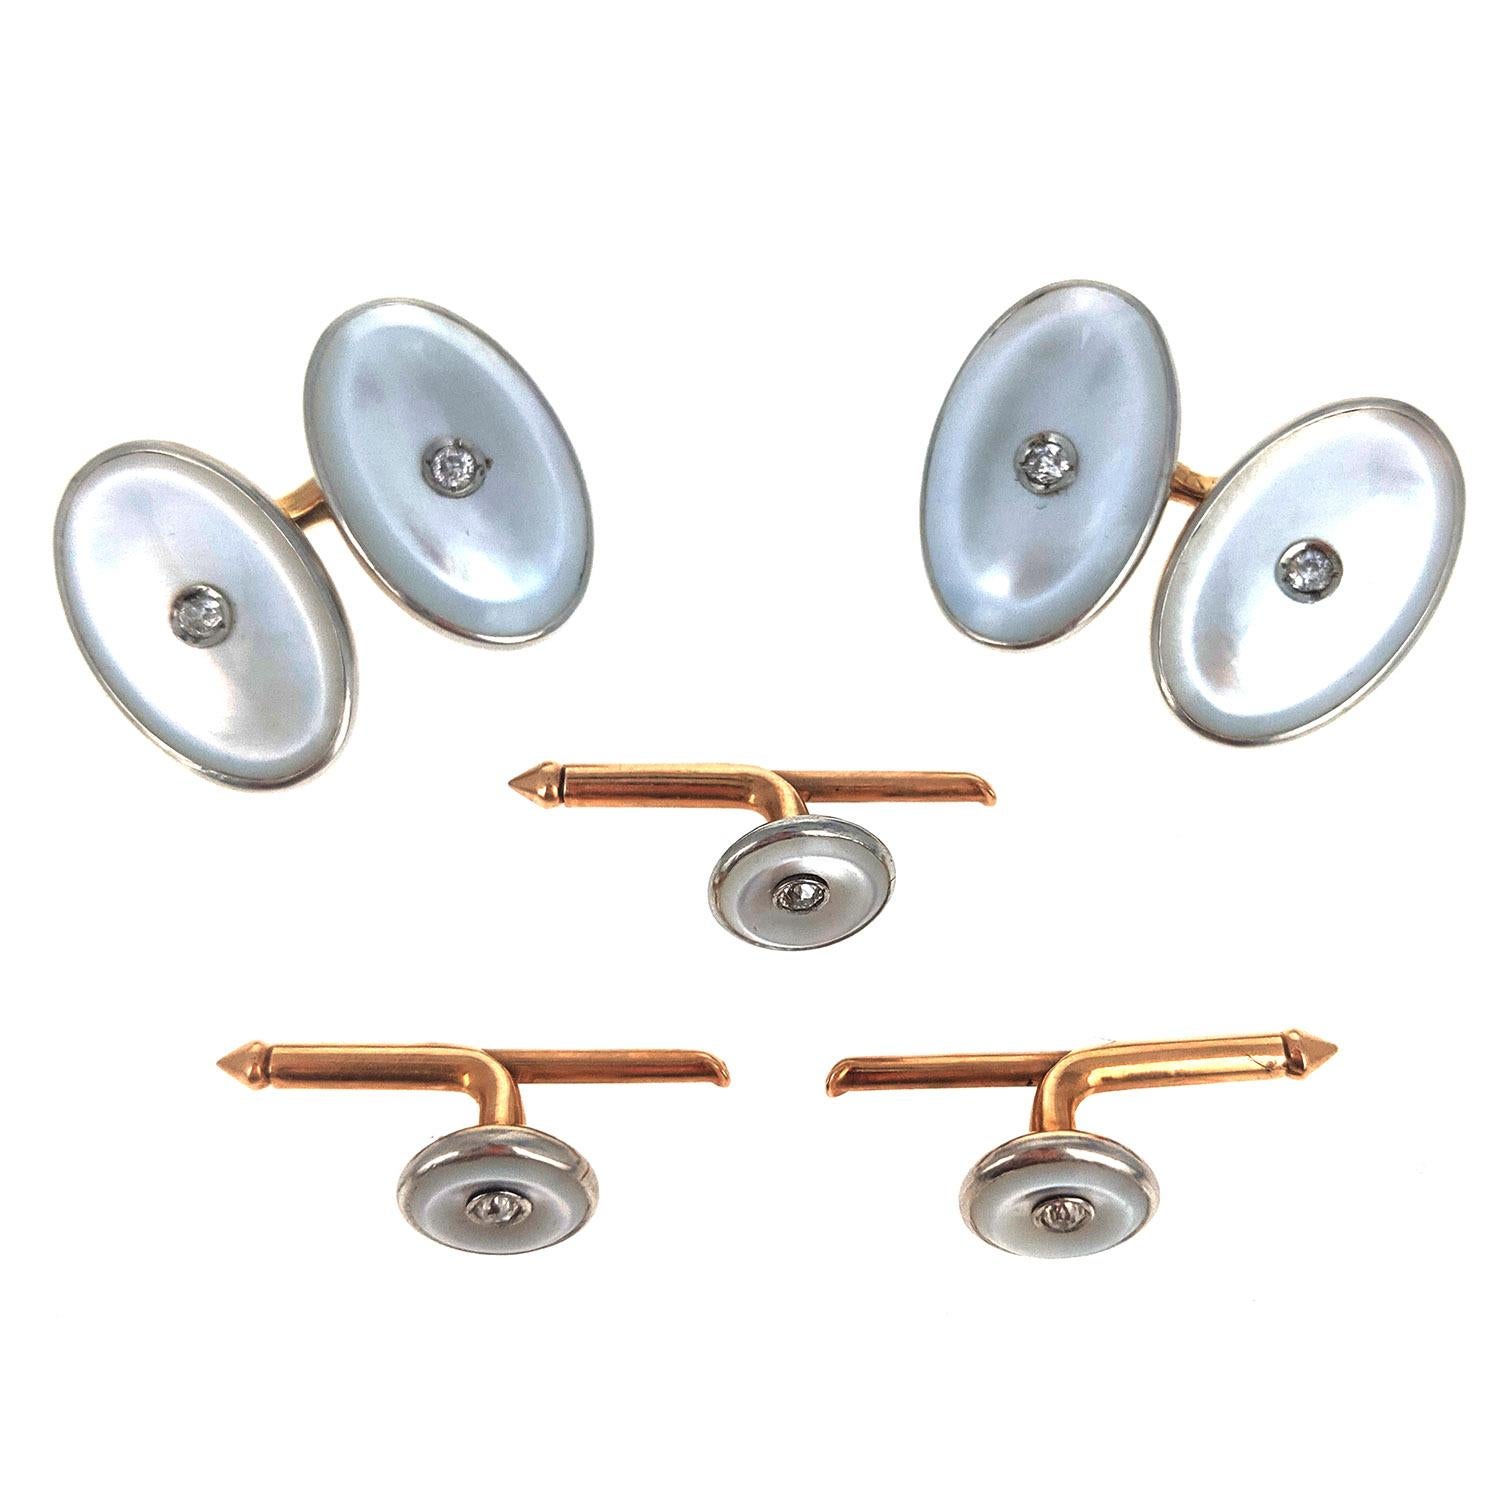 With cufflinks of oval plaques of mother-of-pearl centered around an old-European cut diamond and set in platinum and 1`4k yellow gold. Three buttons of the same design but round in shape. Circa 1920s. Each oval element is about 0.75 in and each